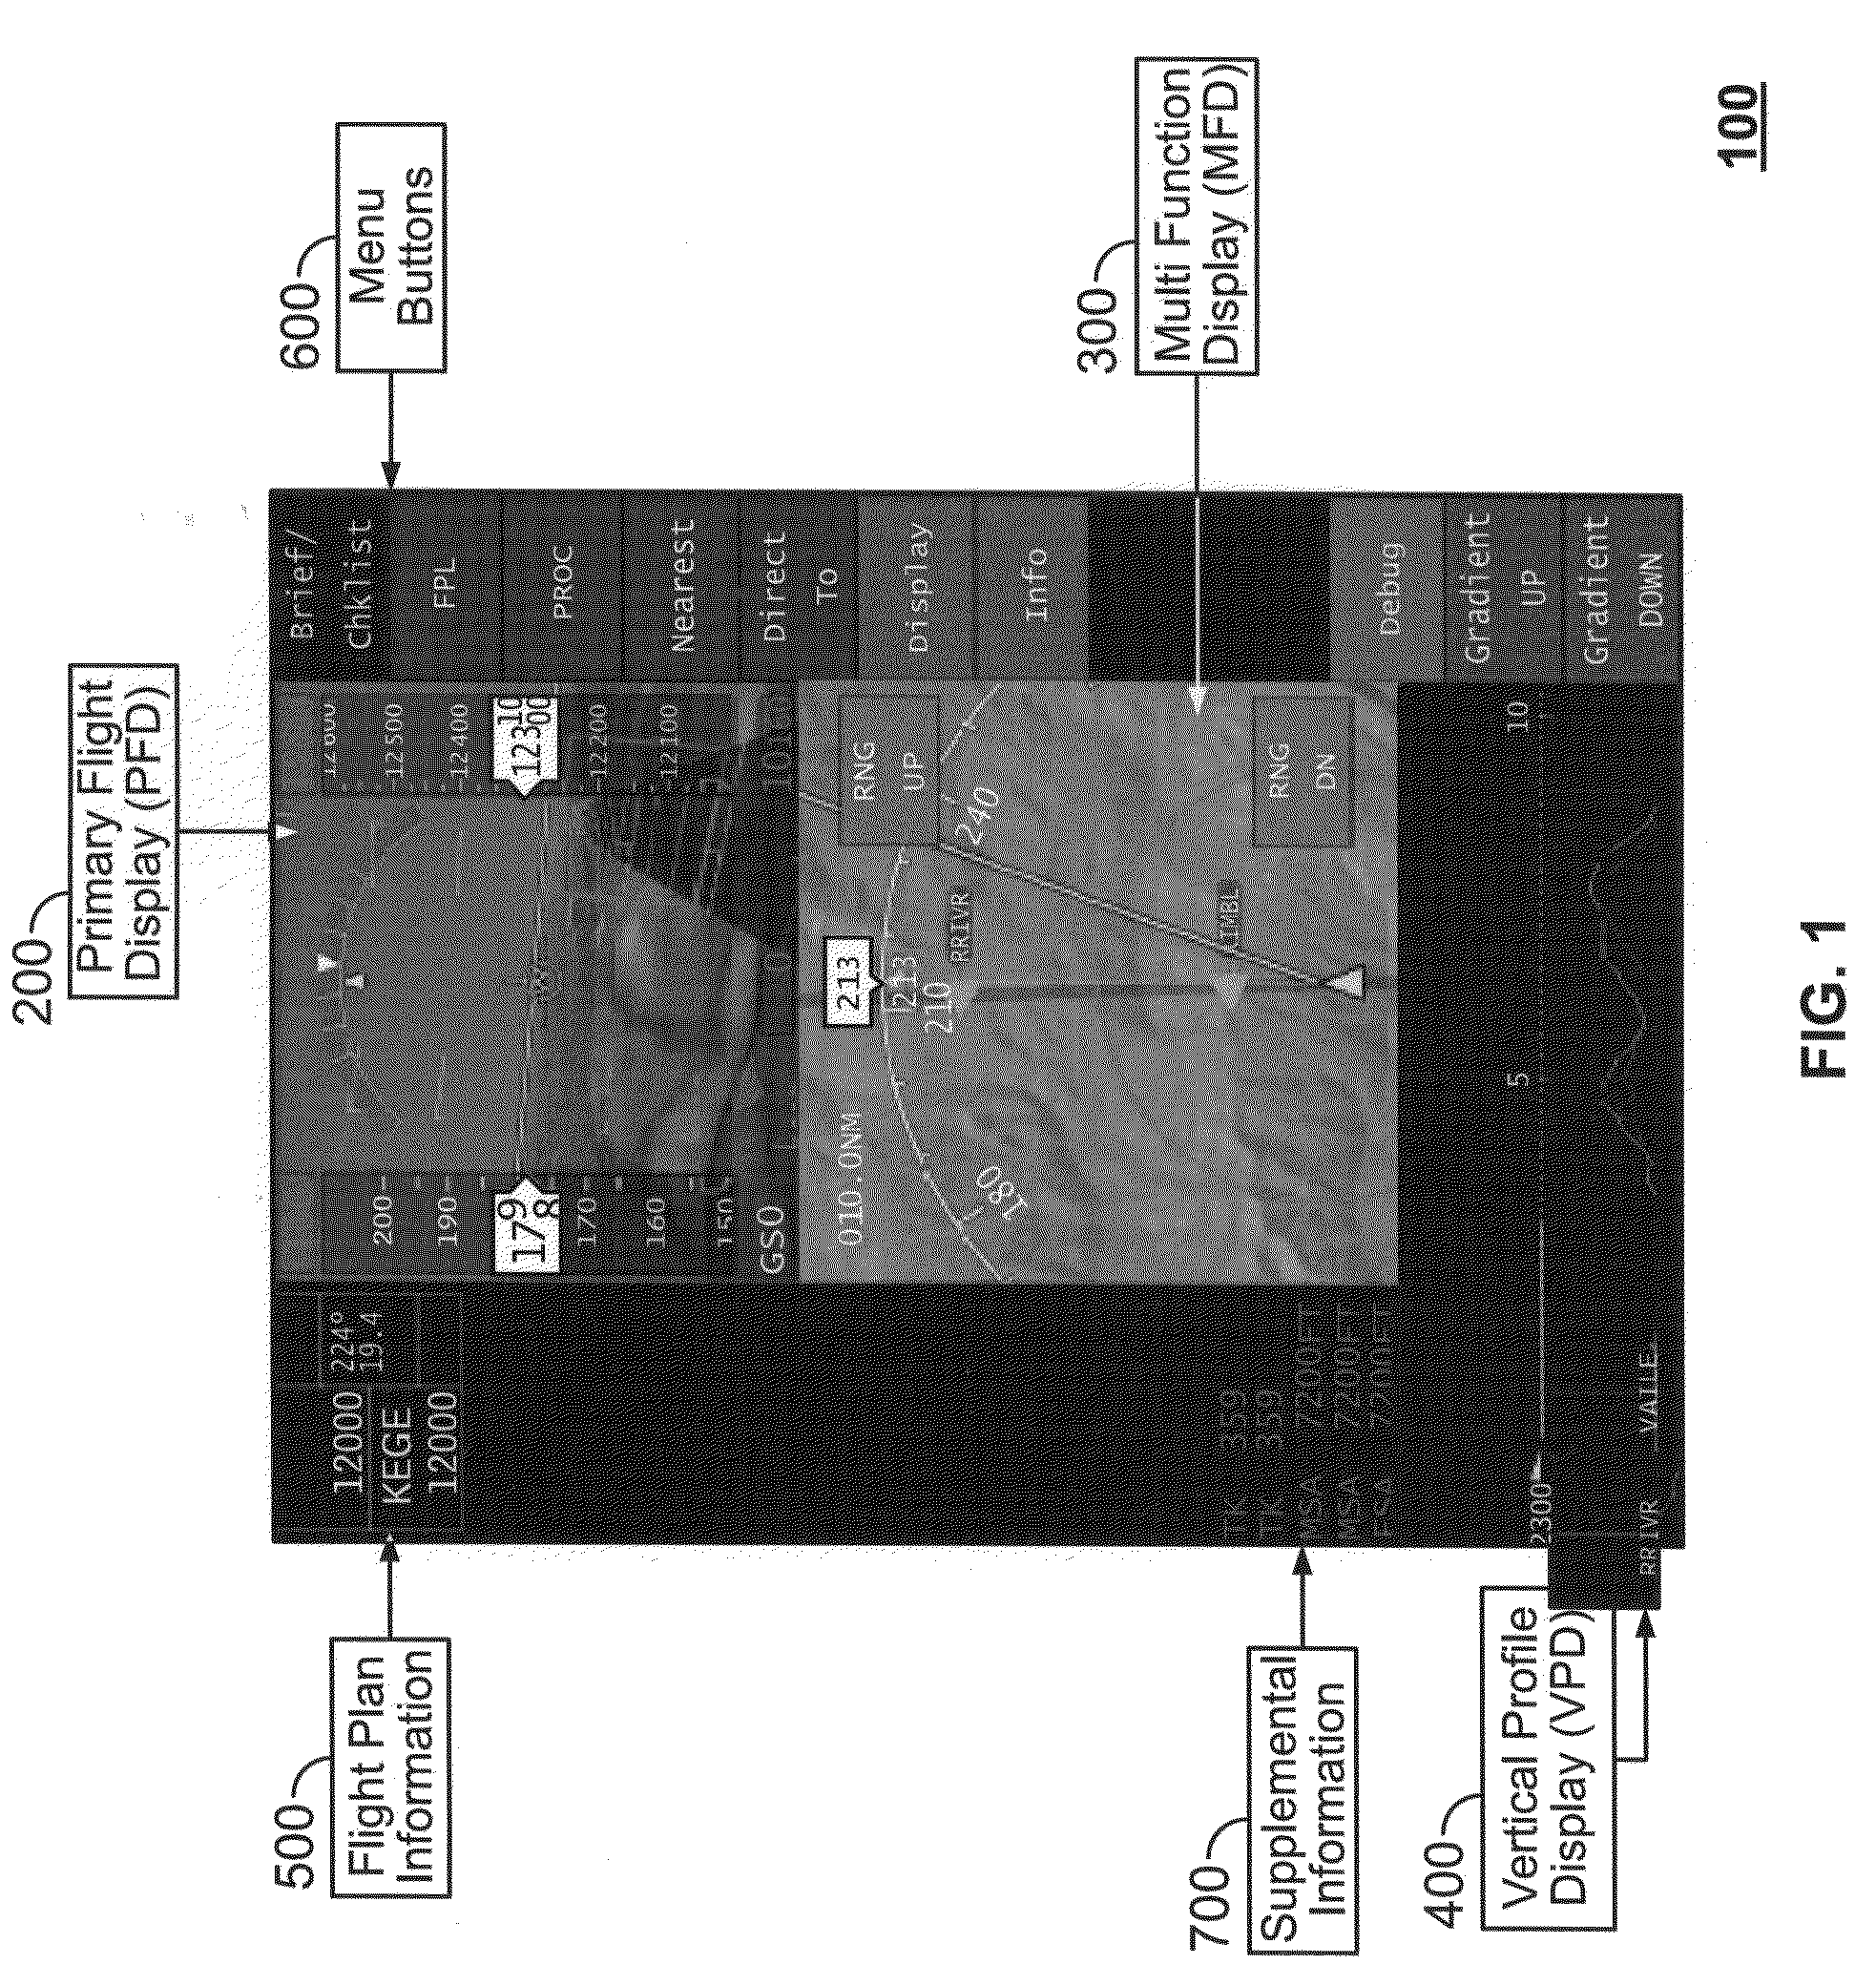 Synthetic vision system and methods